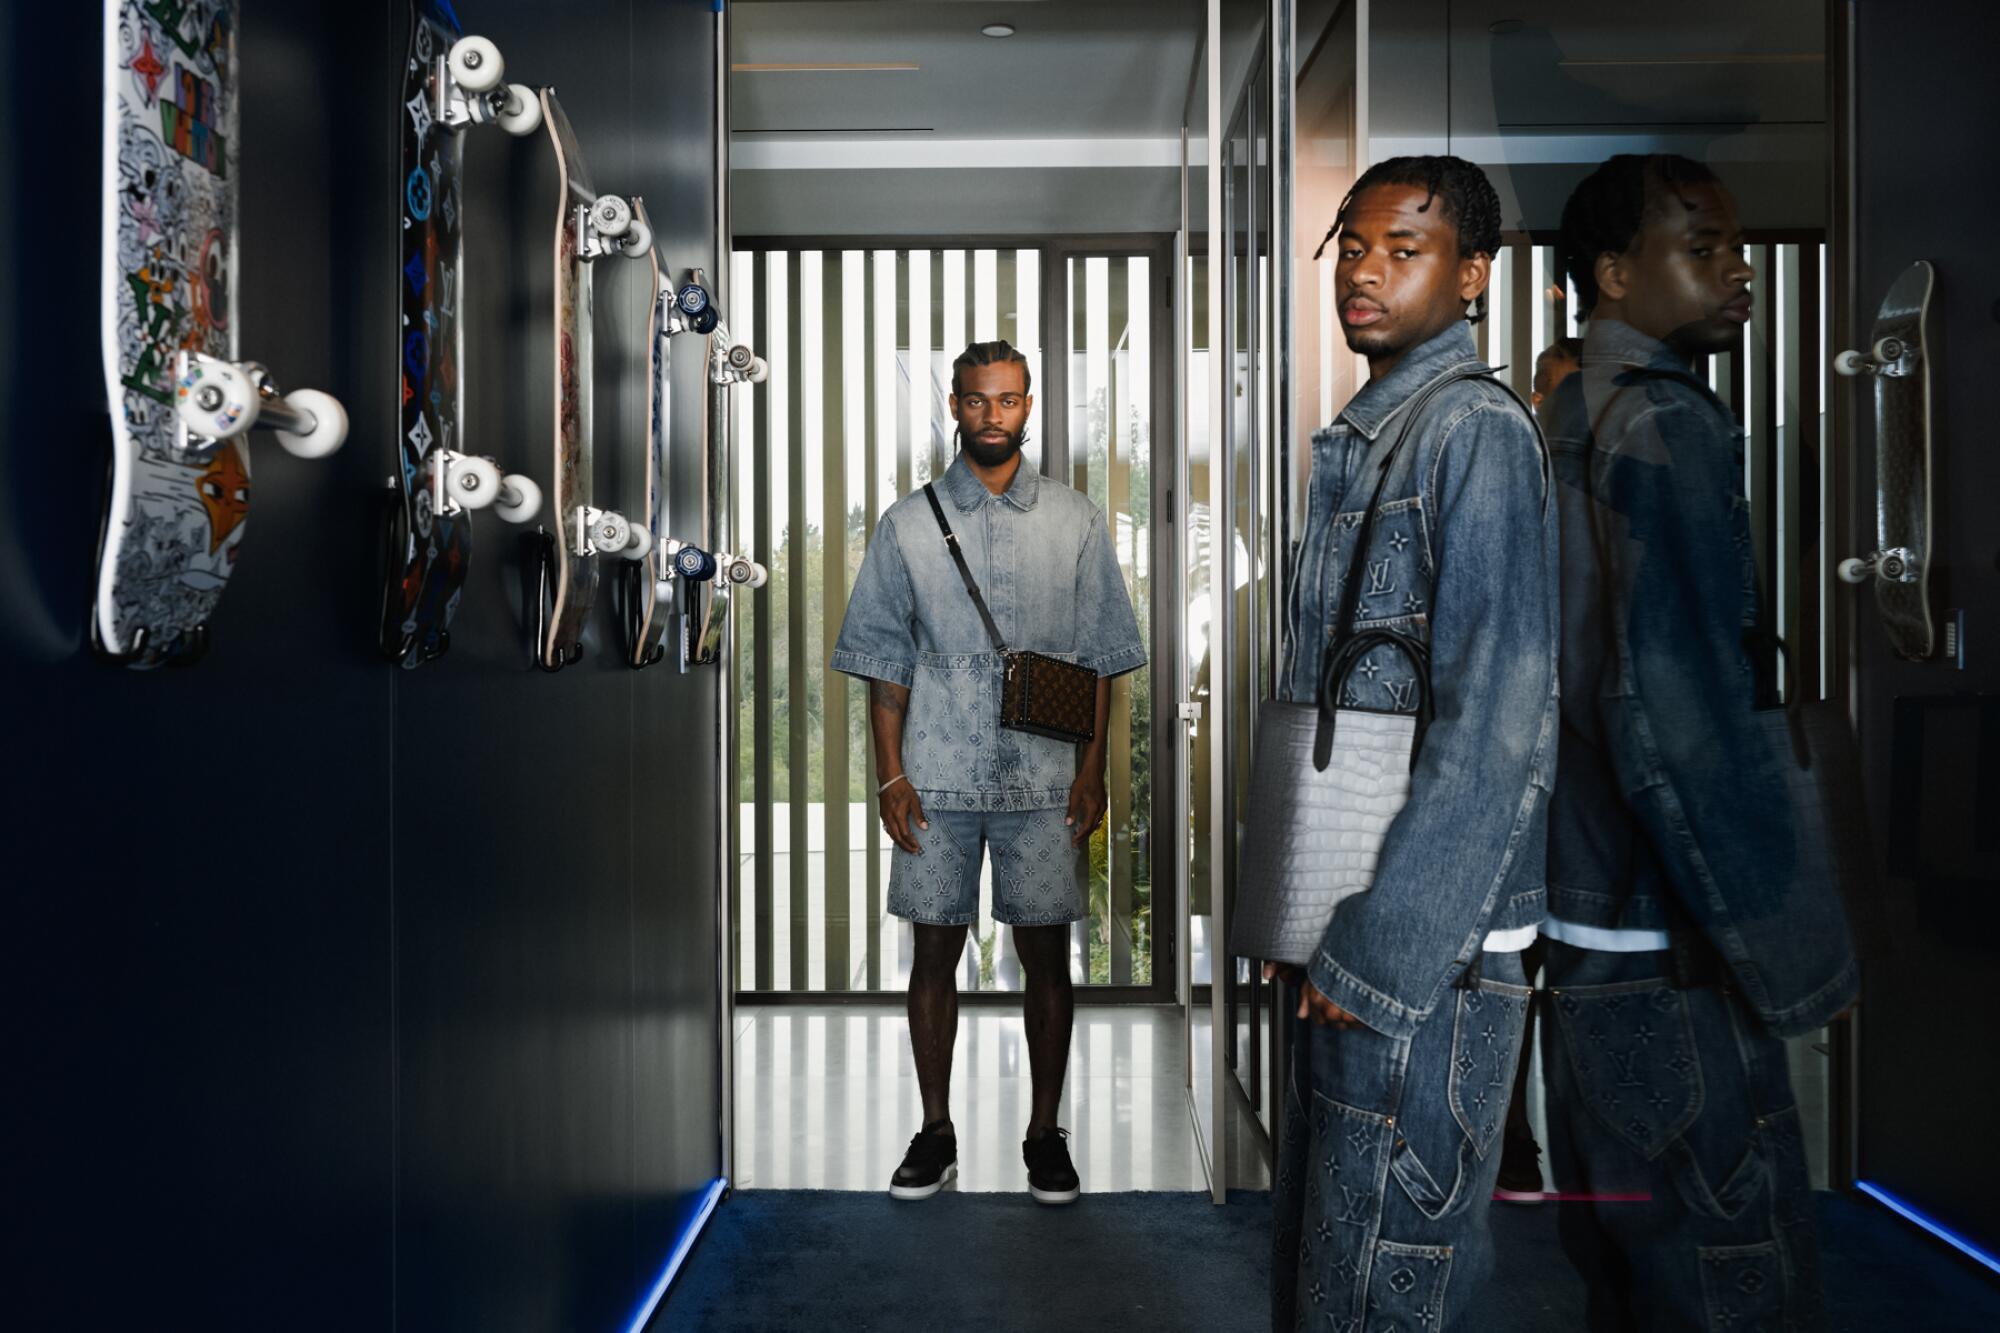 Two men wearing denim pose in a hallway with skateboards on the wall.